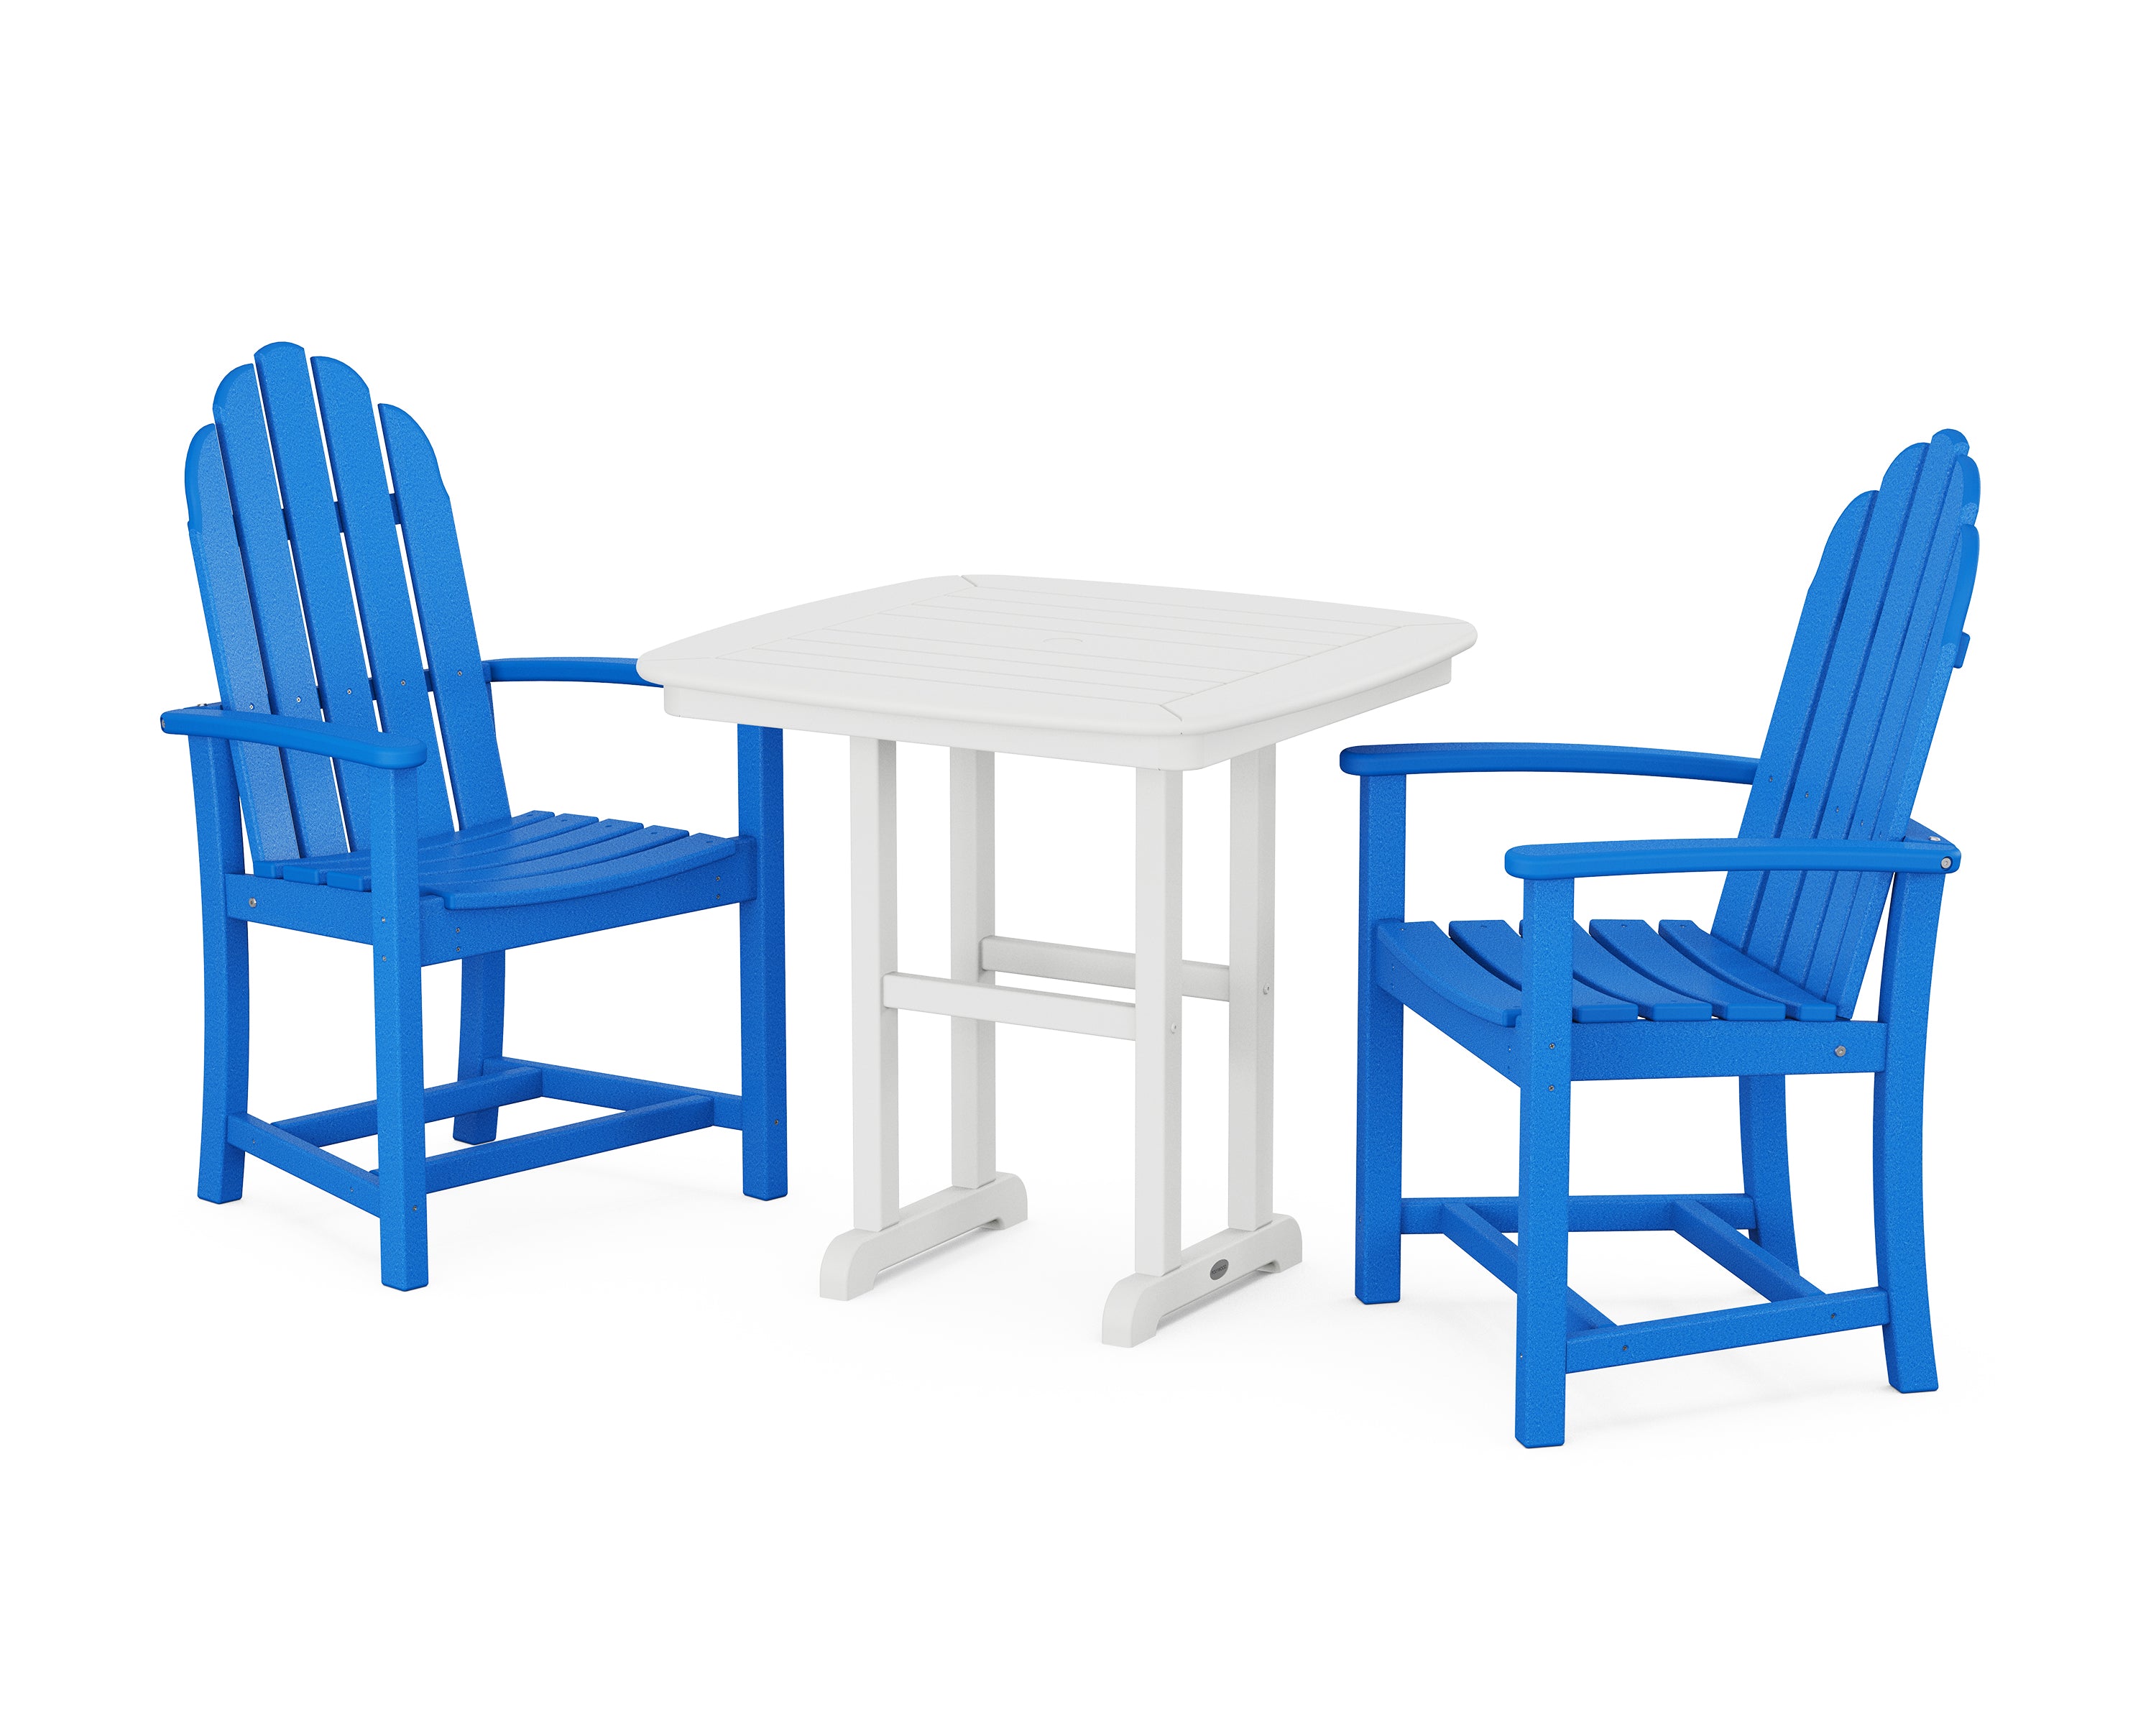 POLYWOOD® Classic Adirondack 3-Piece Dining Set in Pacific Blue / White